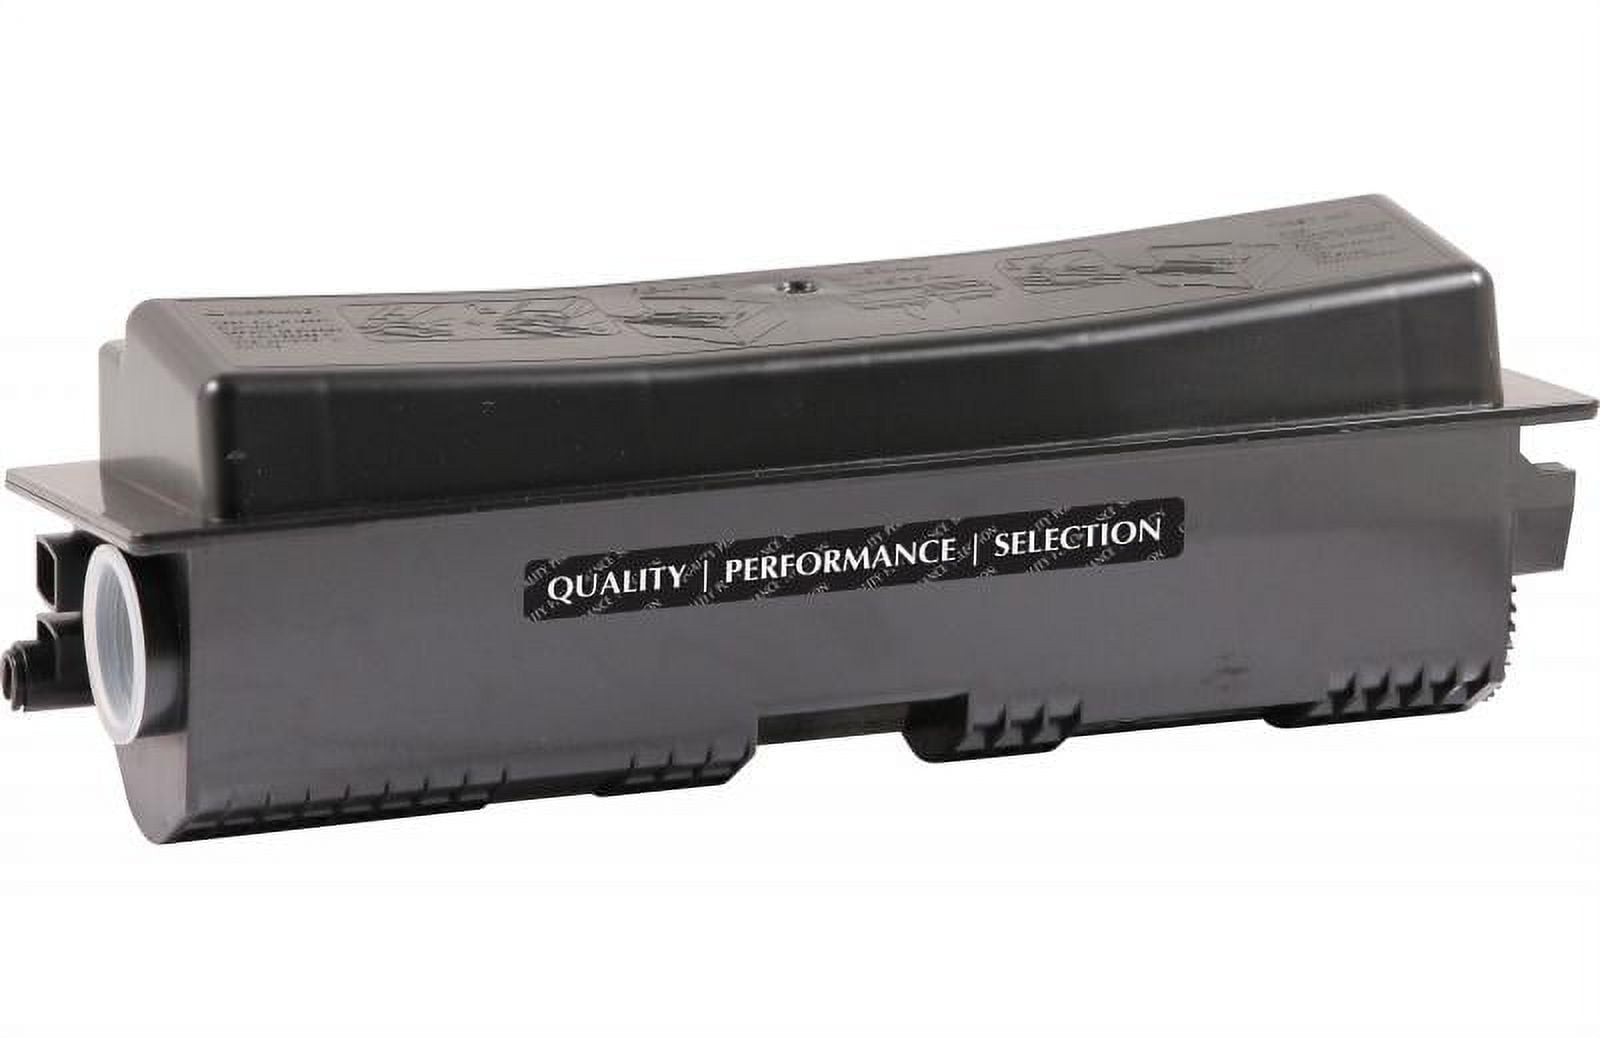 Picture of CIG 201004 Non-New Toner Cartridge for Kyocera TK-162